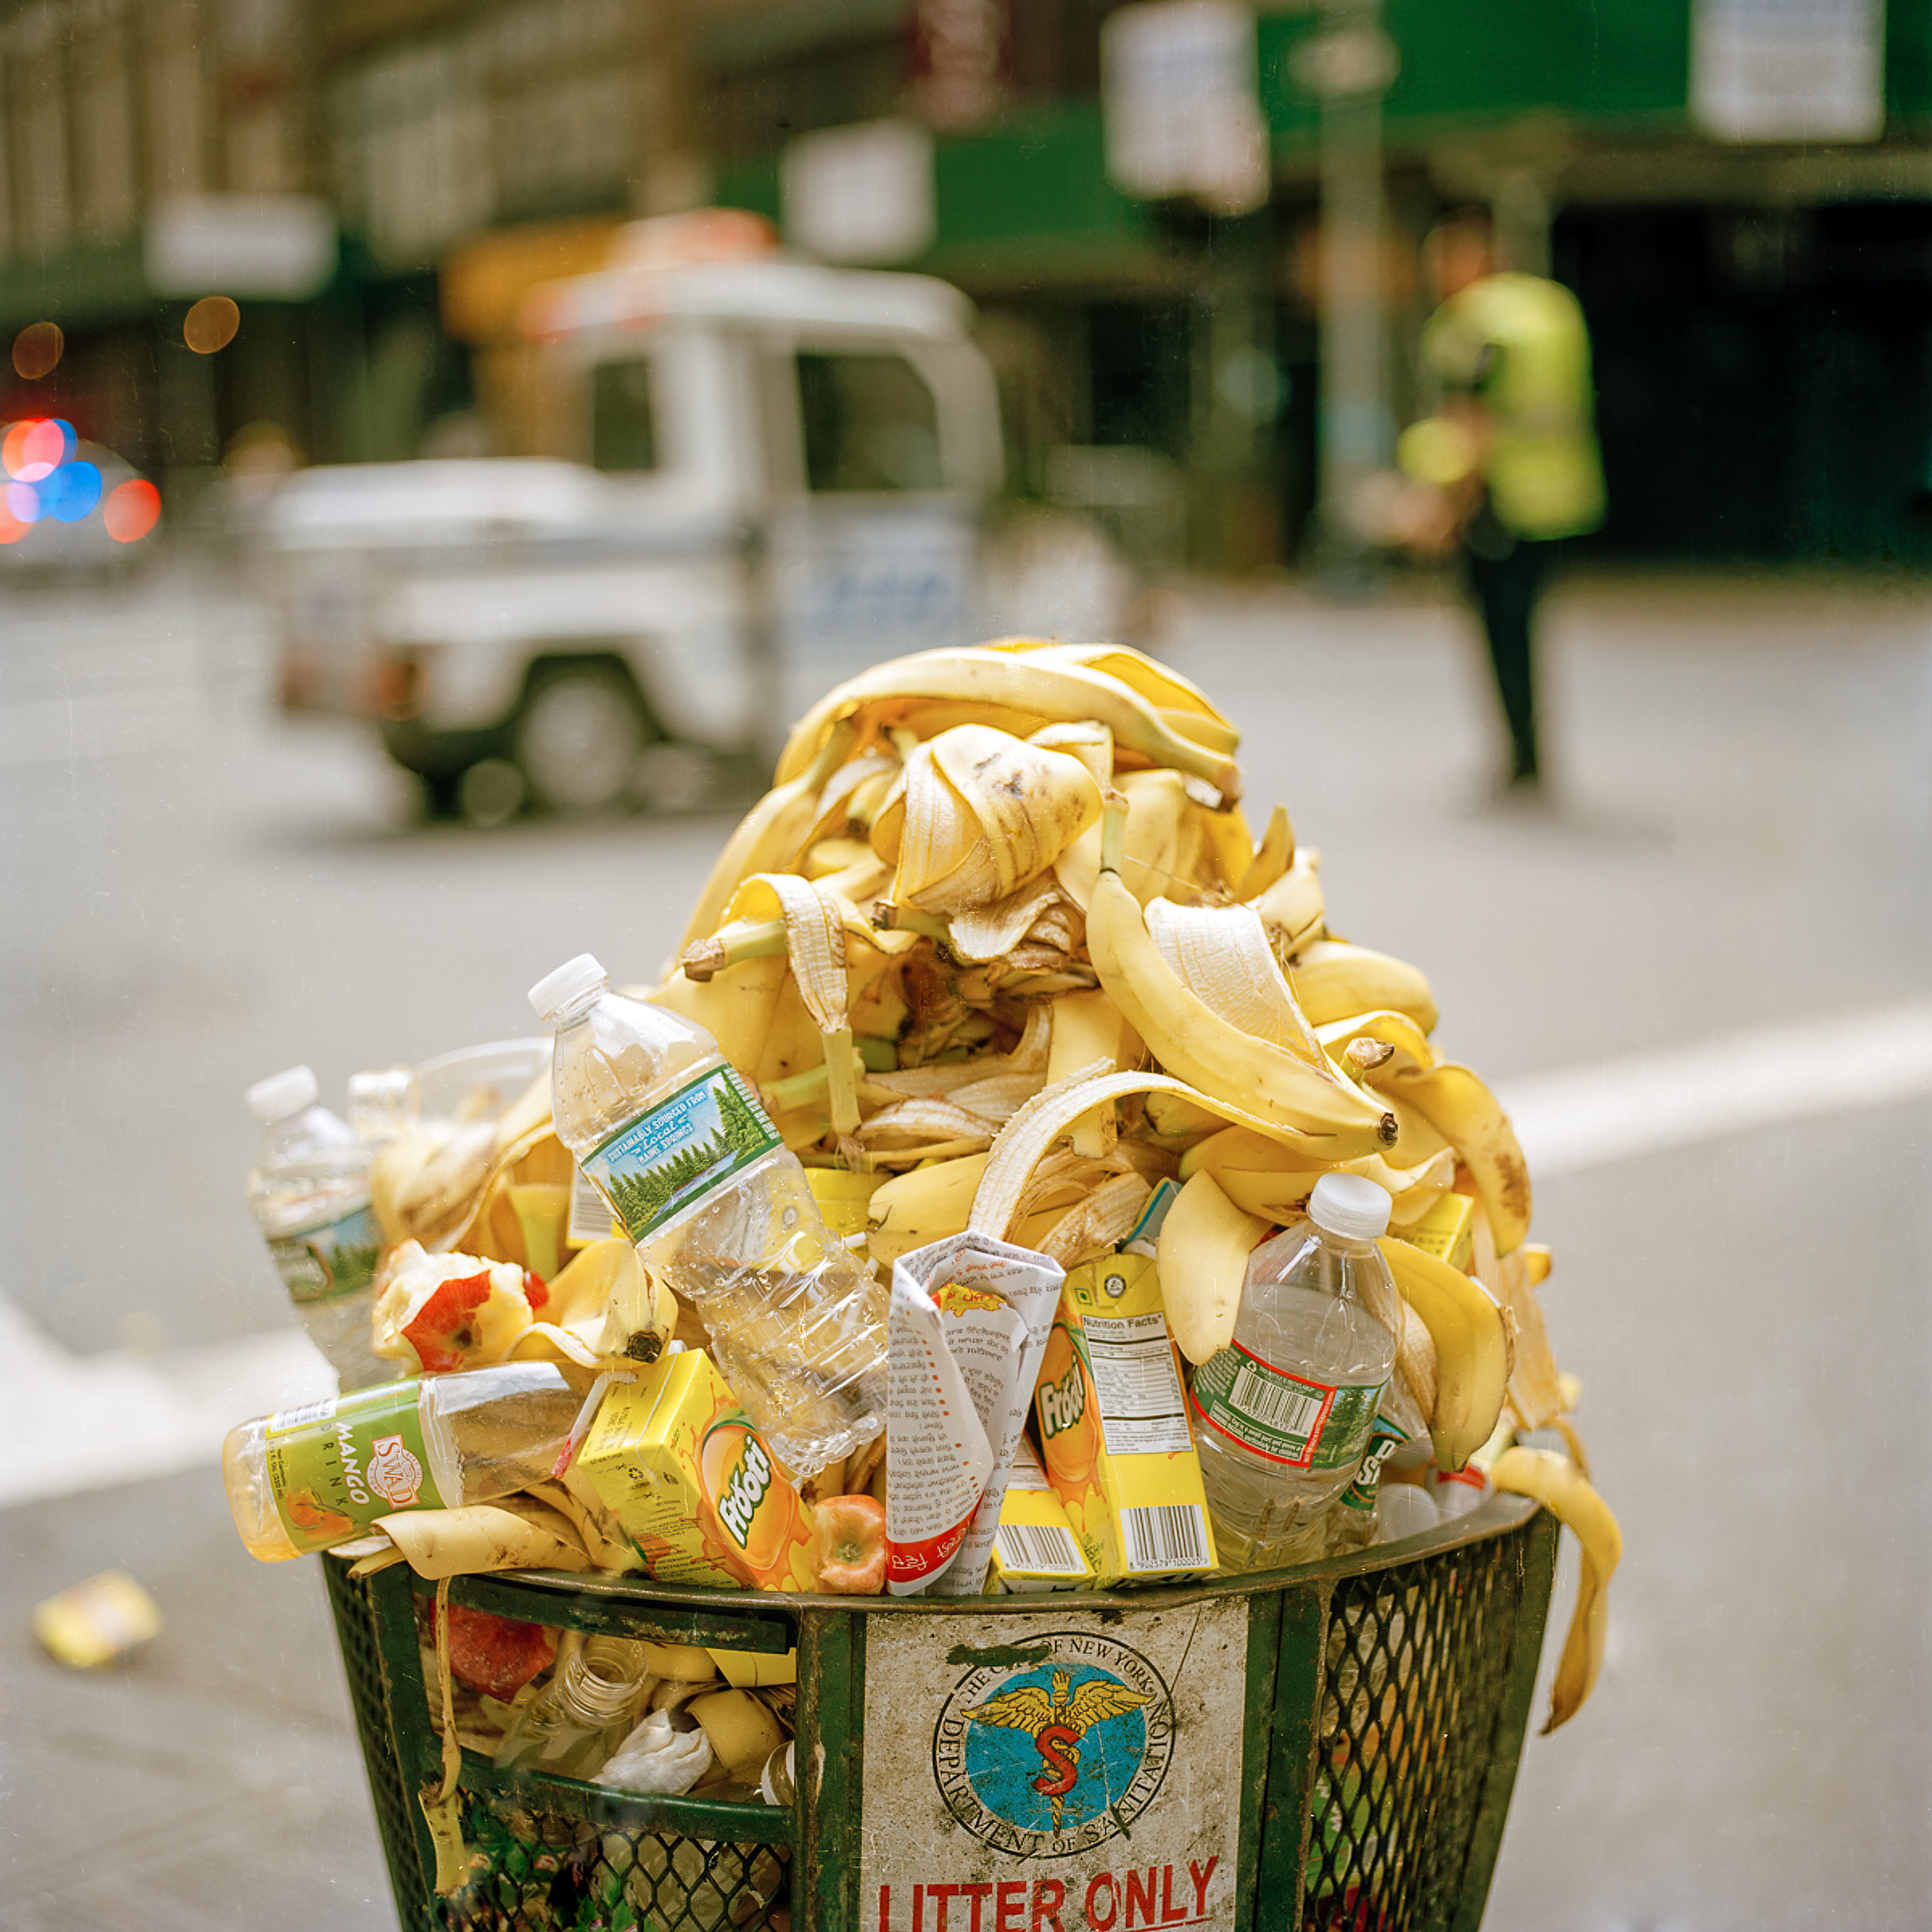 A pile of banana skins sits in a New York City Trash can in Midtown East